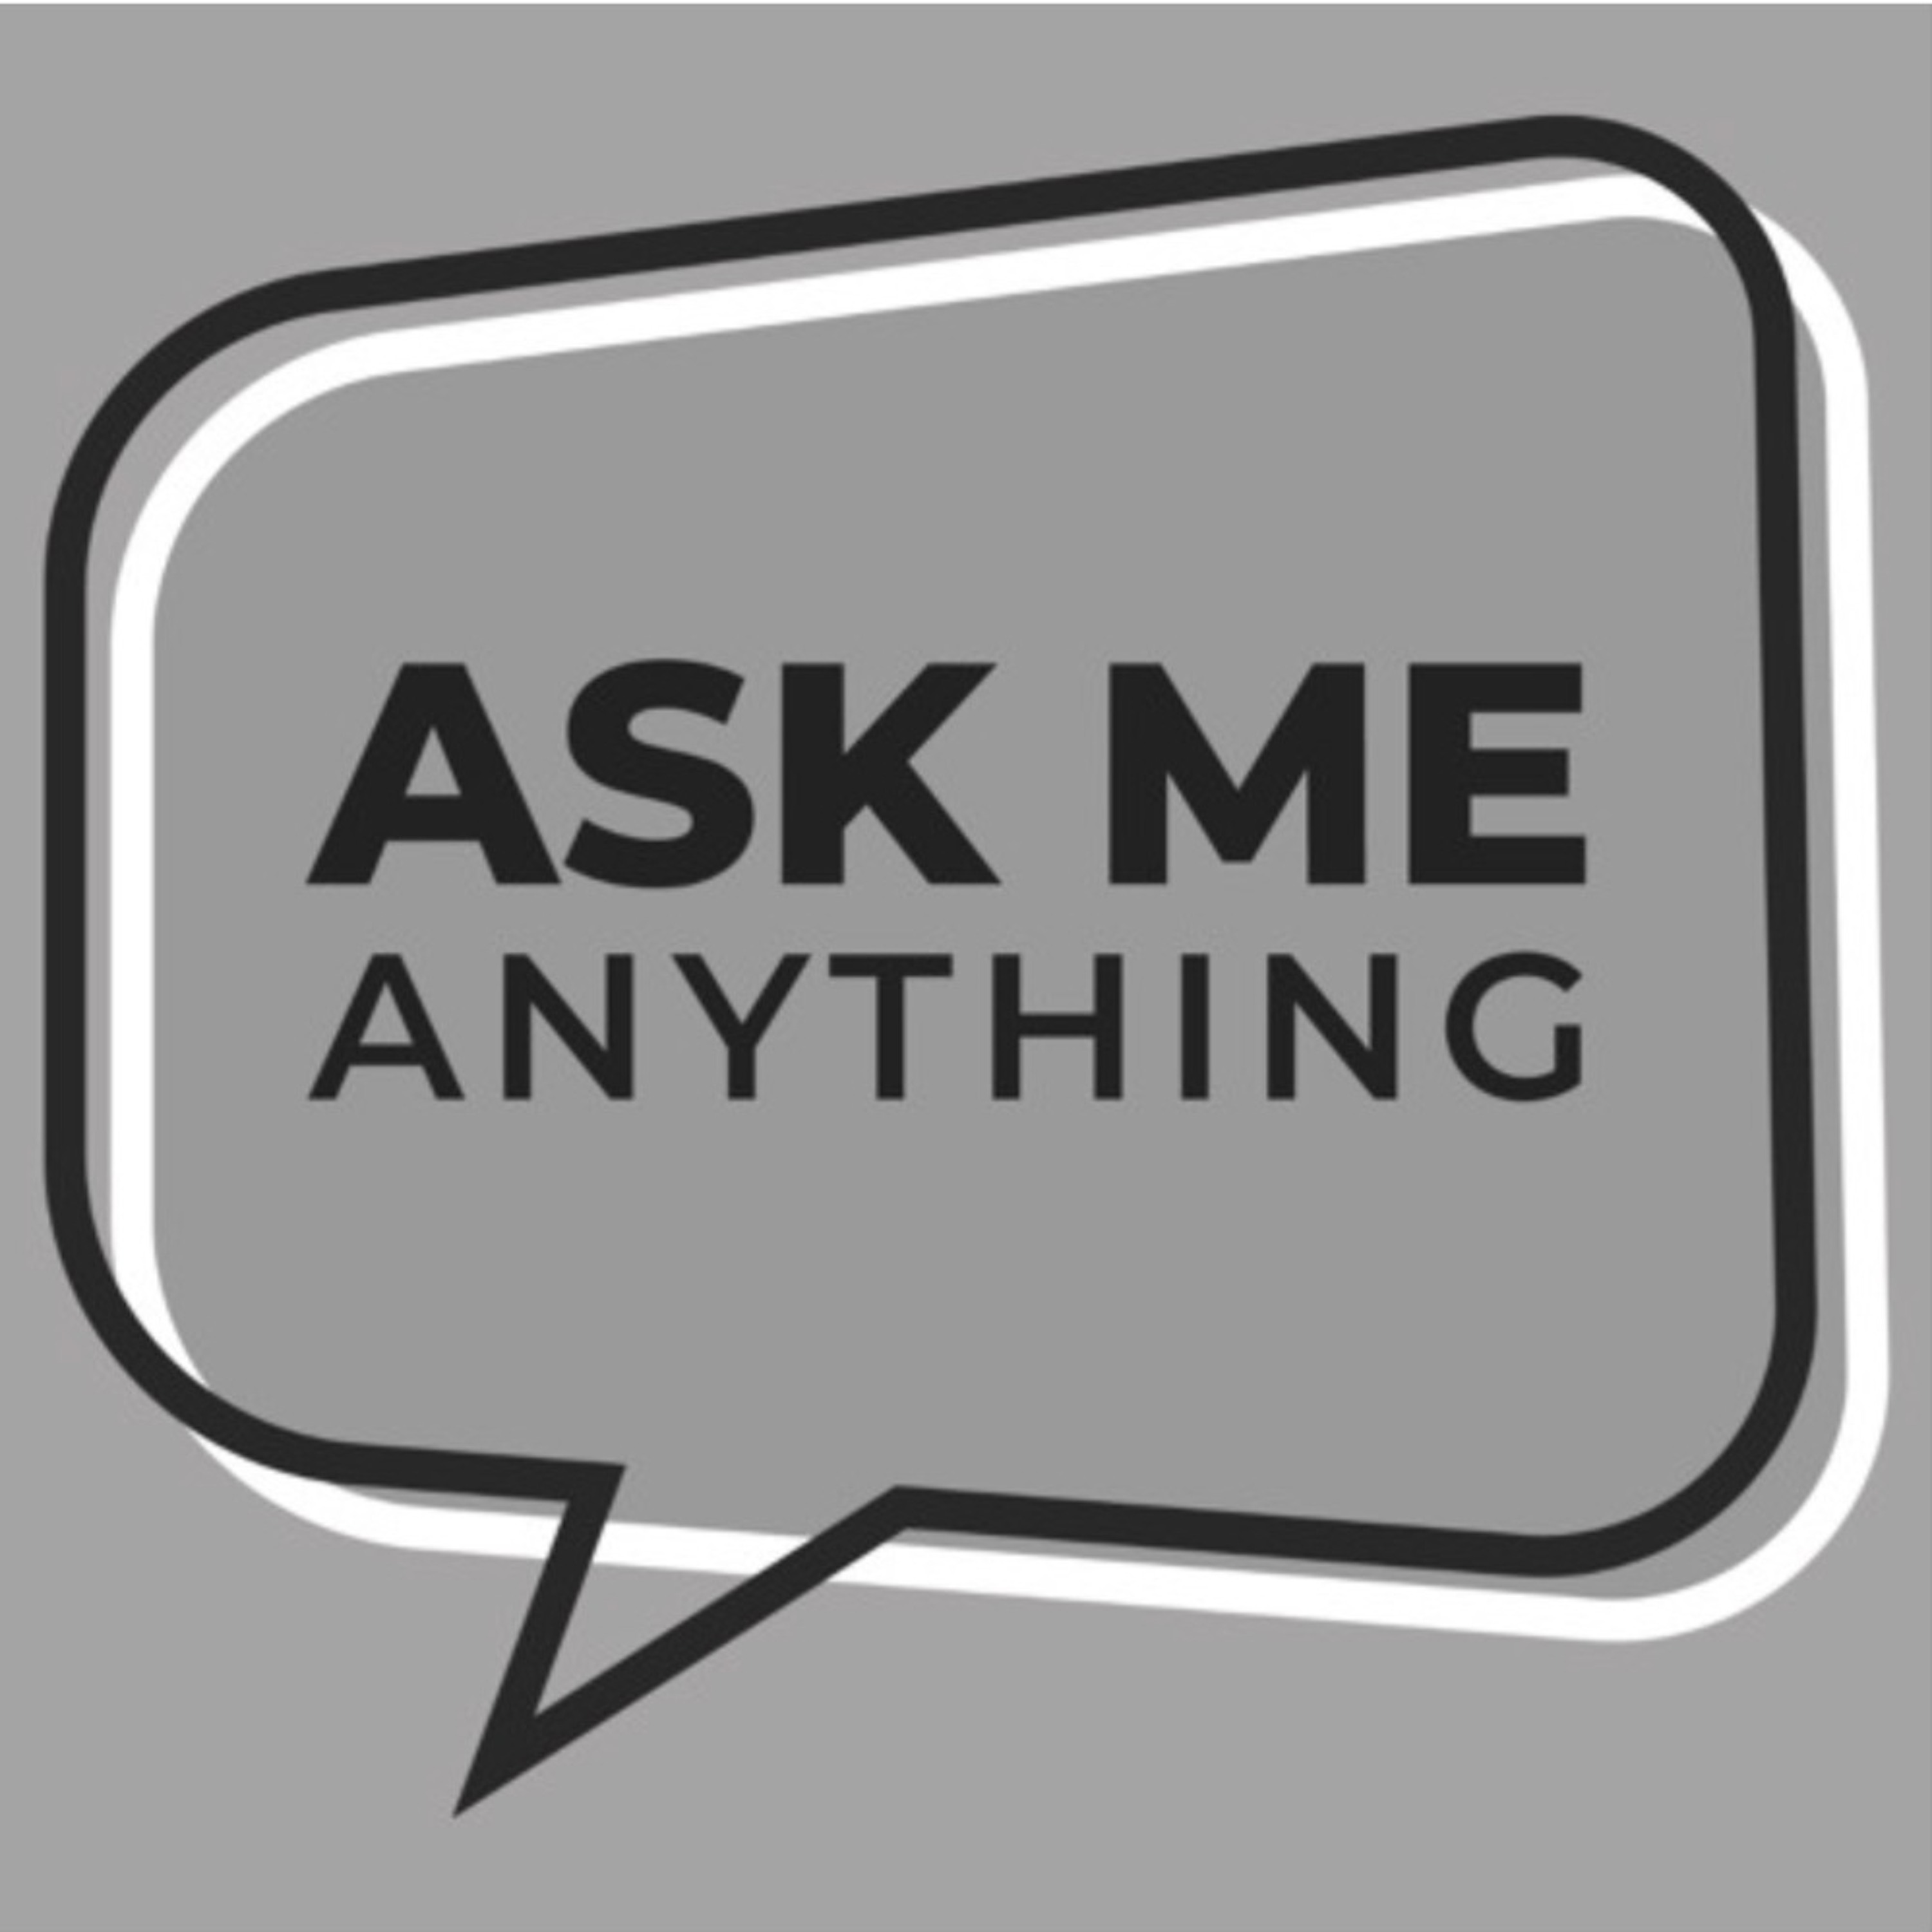 Ask Me Anything, Theresa Payton. Pursuing Suspects Online. Sponsored By Pipl.